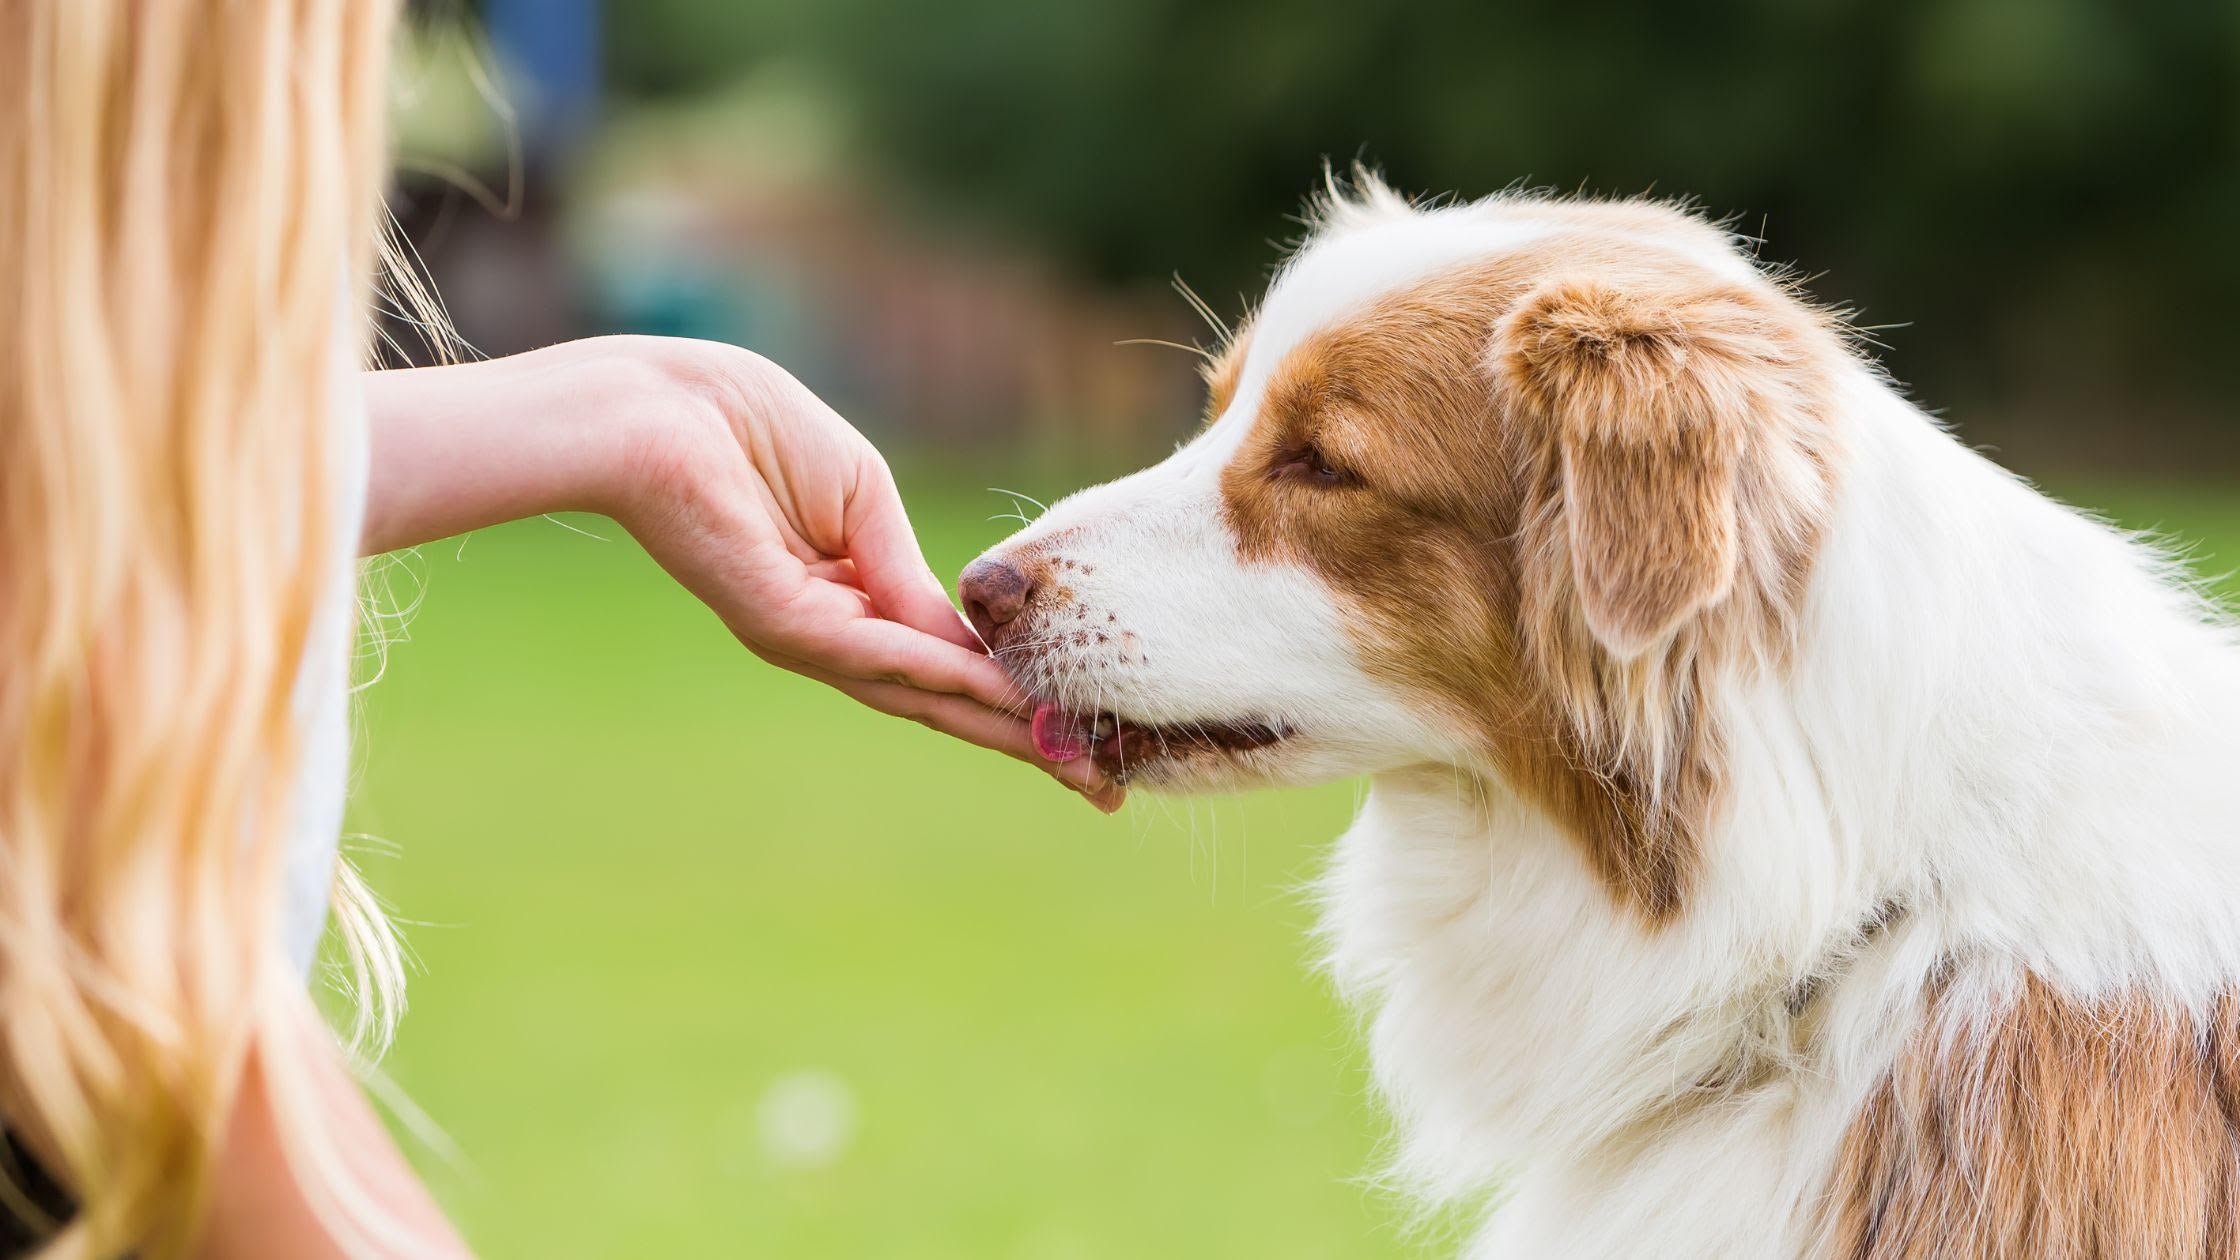 10 Essential Vitamins for Dogs and Cats That Your Pet Needs to Stay Healthy